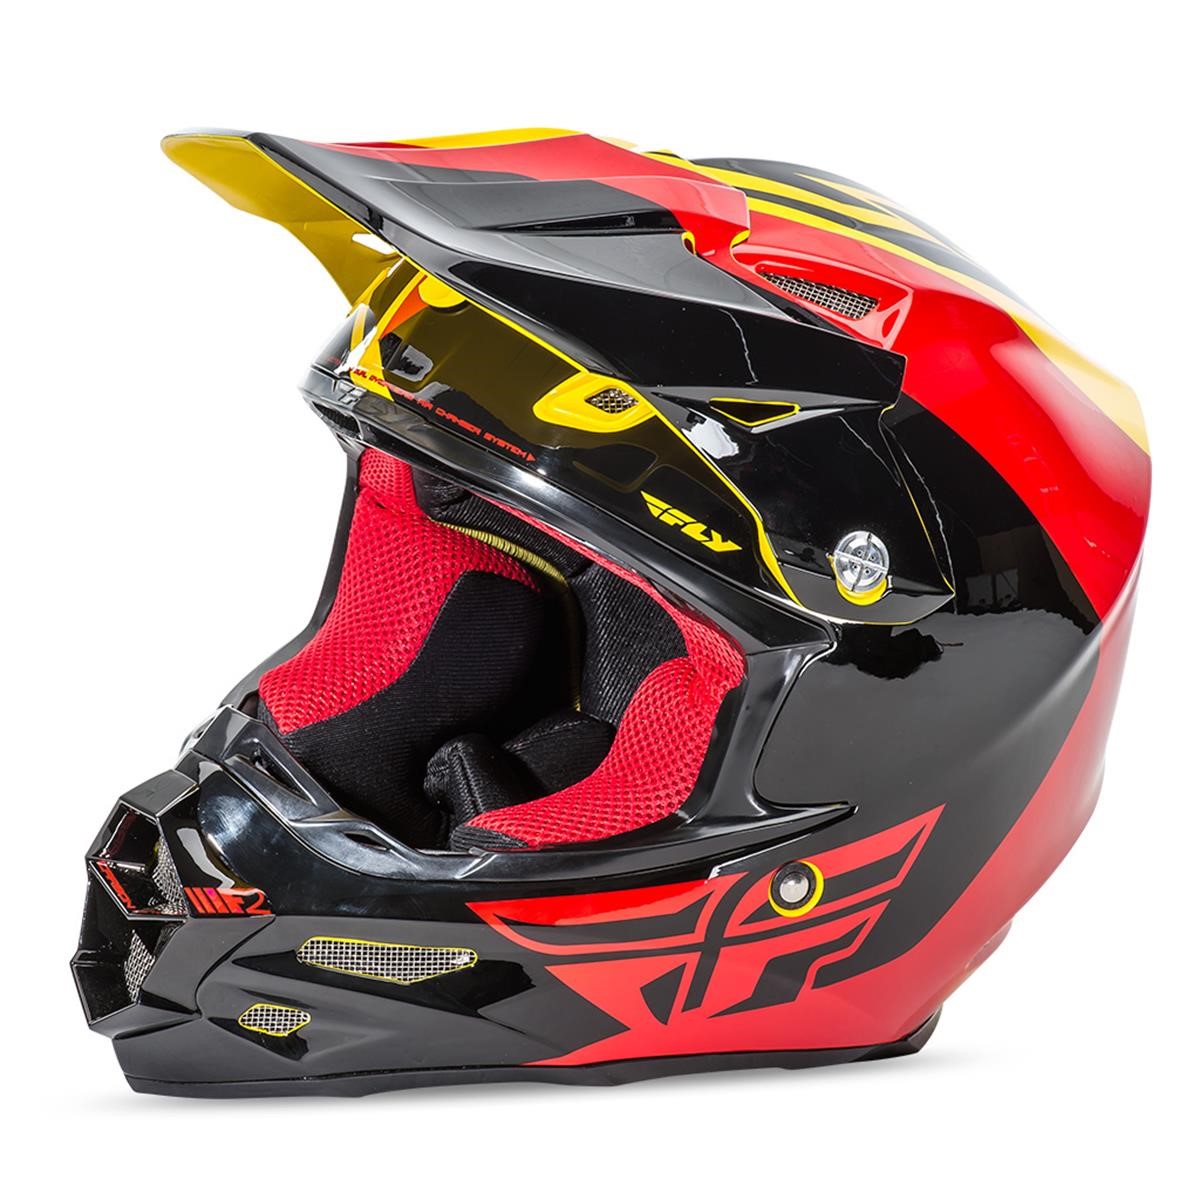 Fly Racing Helm F2 Carbon Pure Gelb/Schwarz/Rot